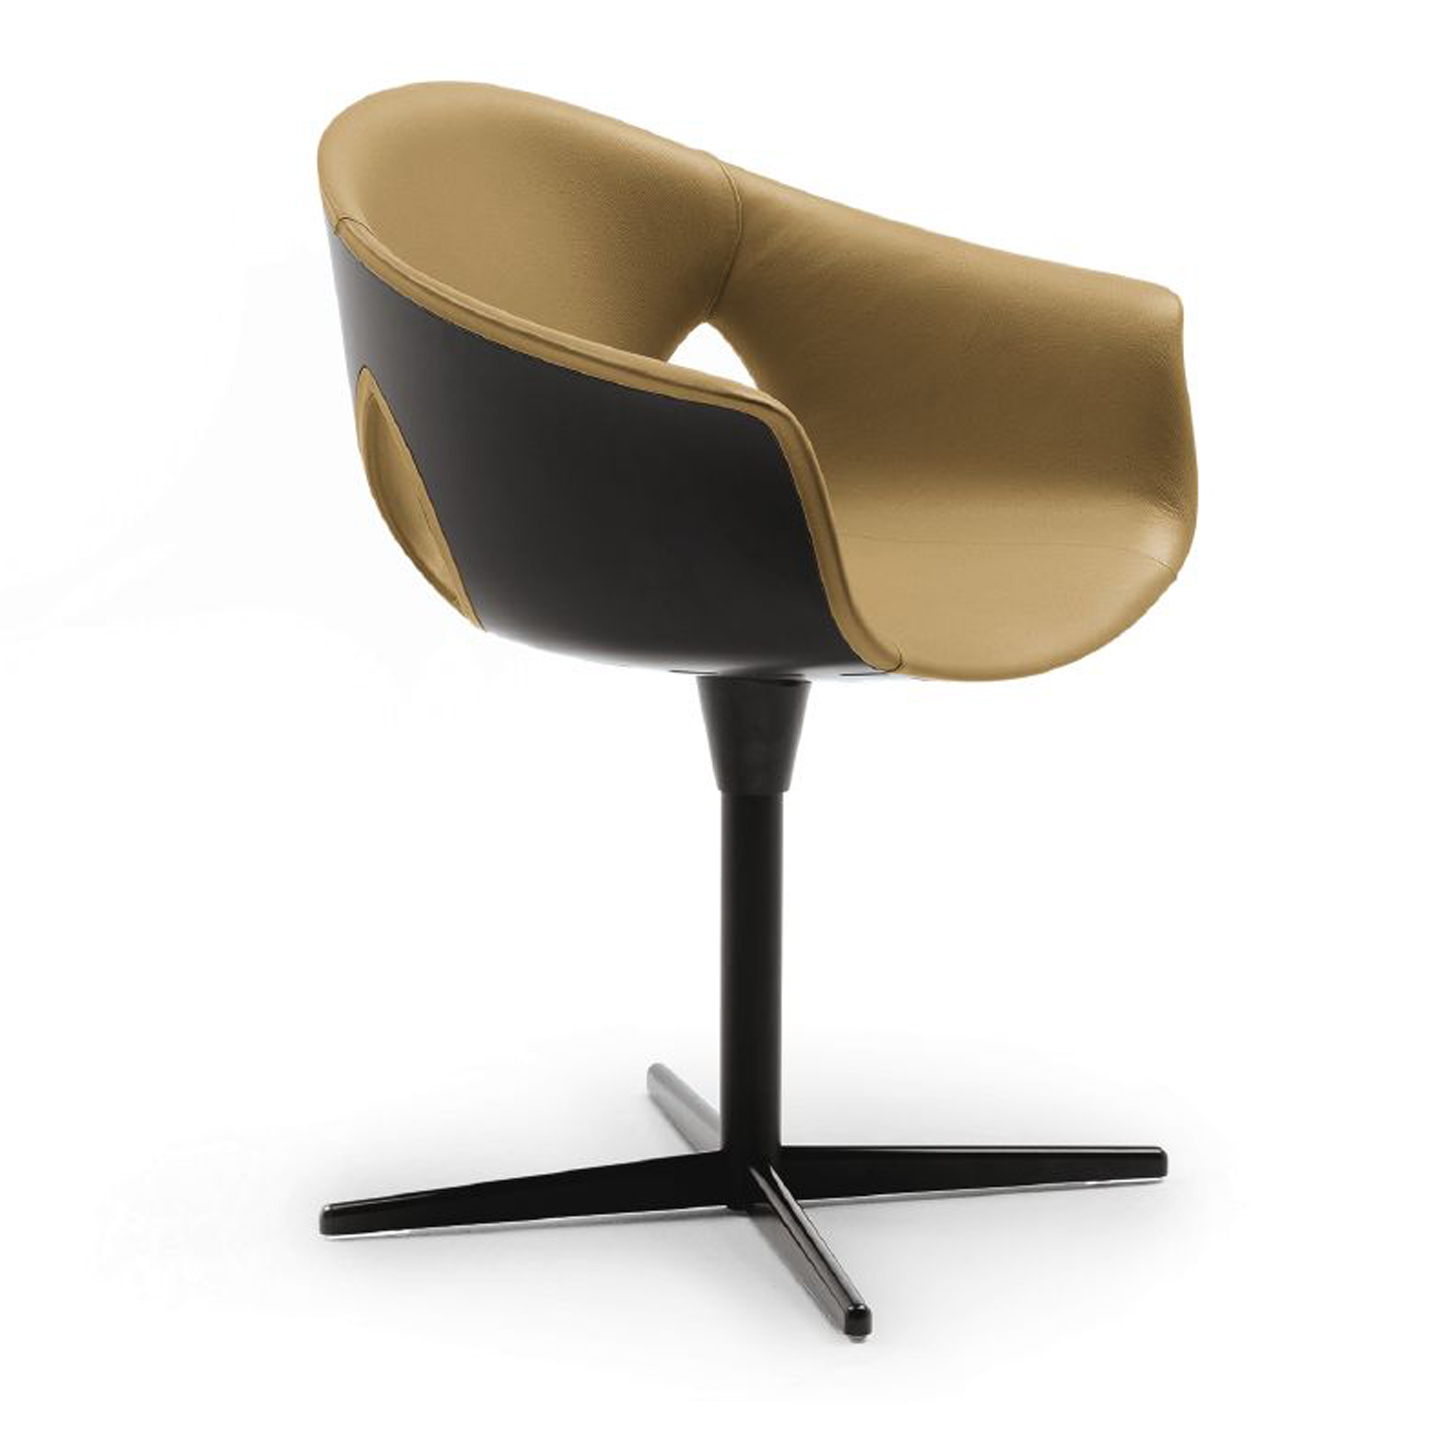 Haworth Ginger Ale chair in mustard leather upholstery and black exterior side view